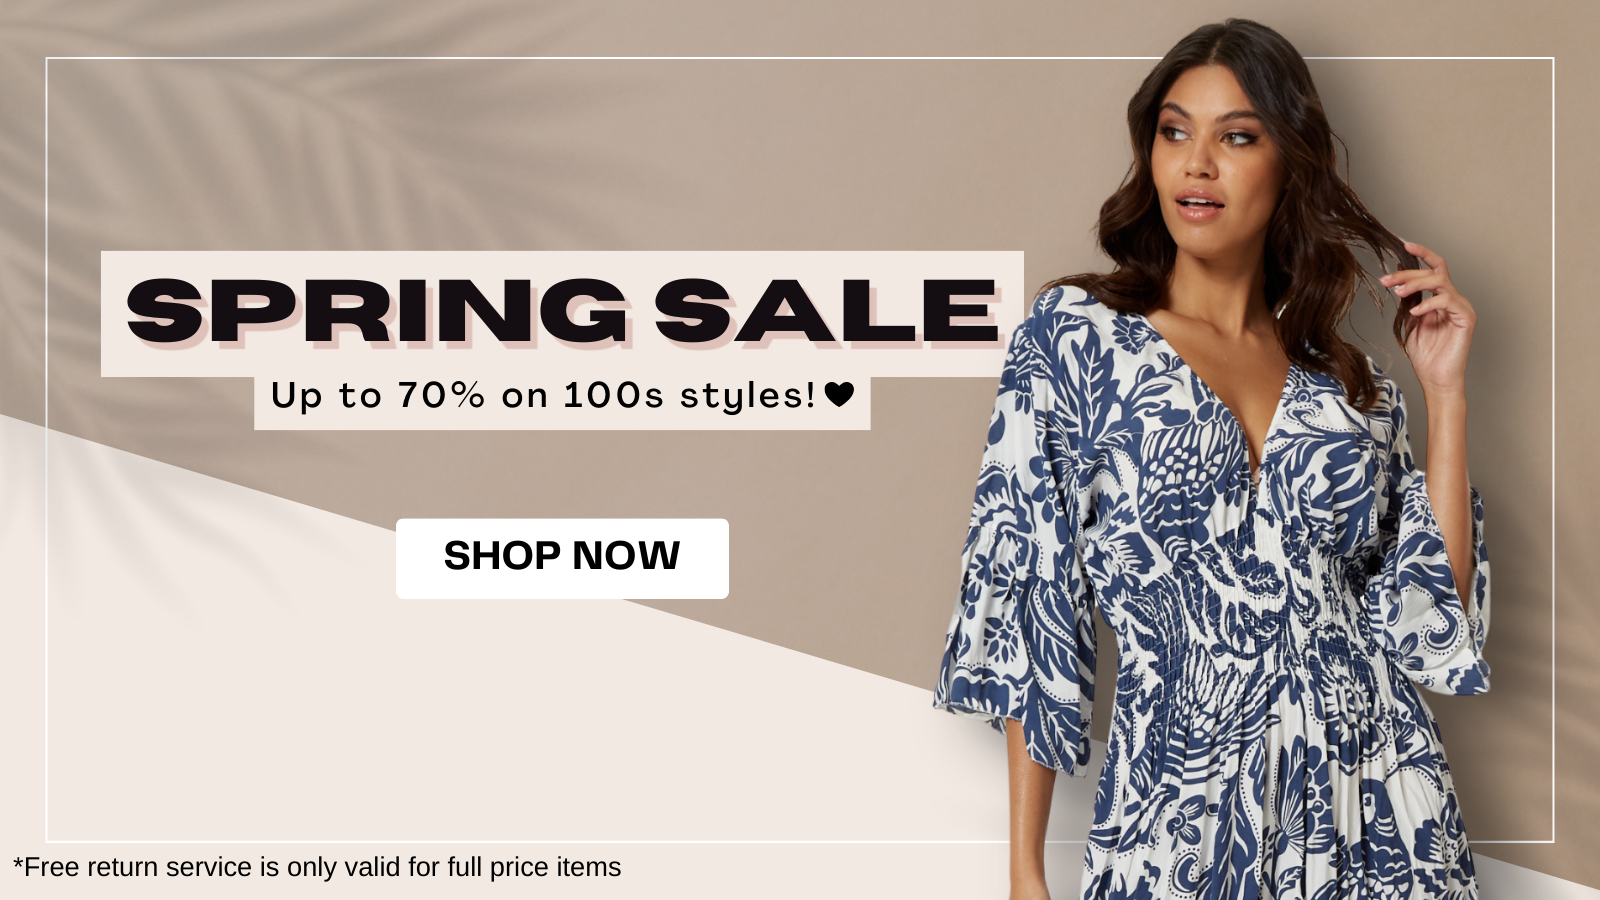 Discount Sale Huge Savings Up to 70% Flash Sale Sale Dresses Sale Tops Plus Size Styles Oversized Styles